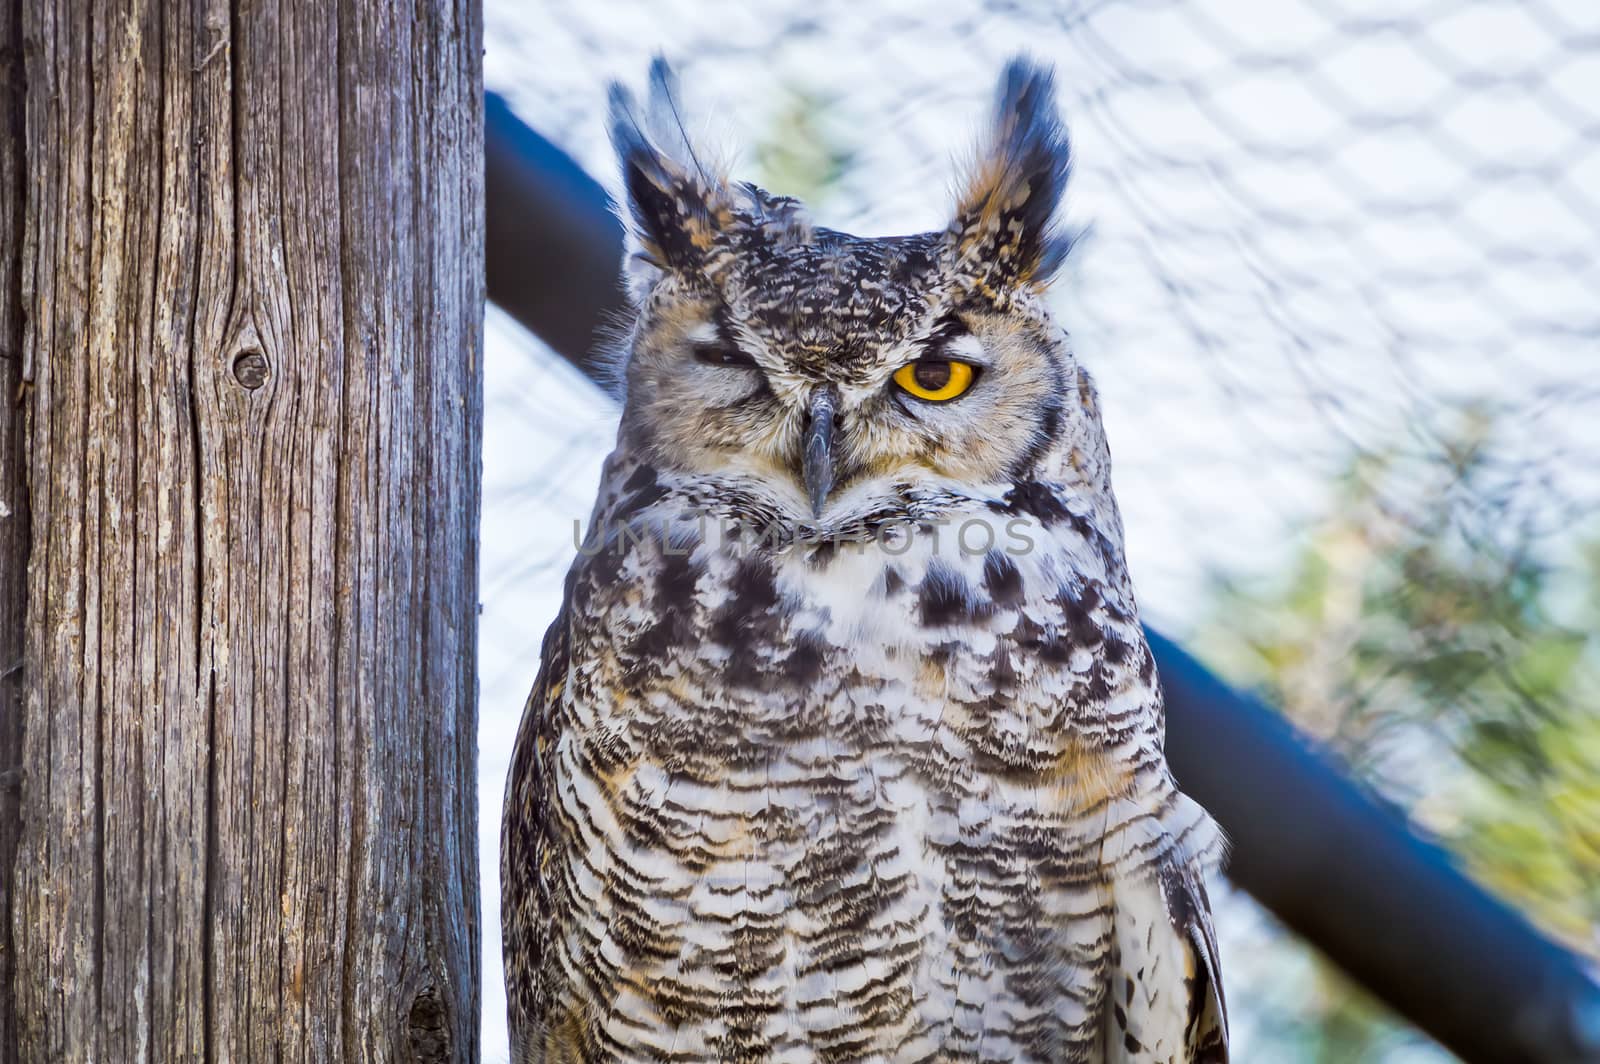 Great Horned Owl squinting one eye, or as I prefer to believe...winking at the camera.